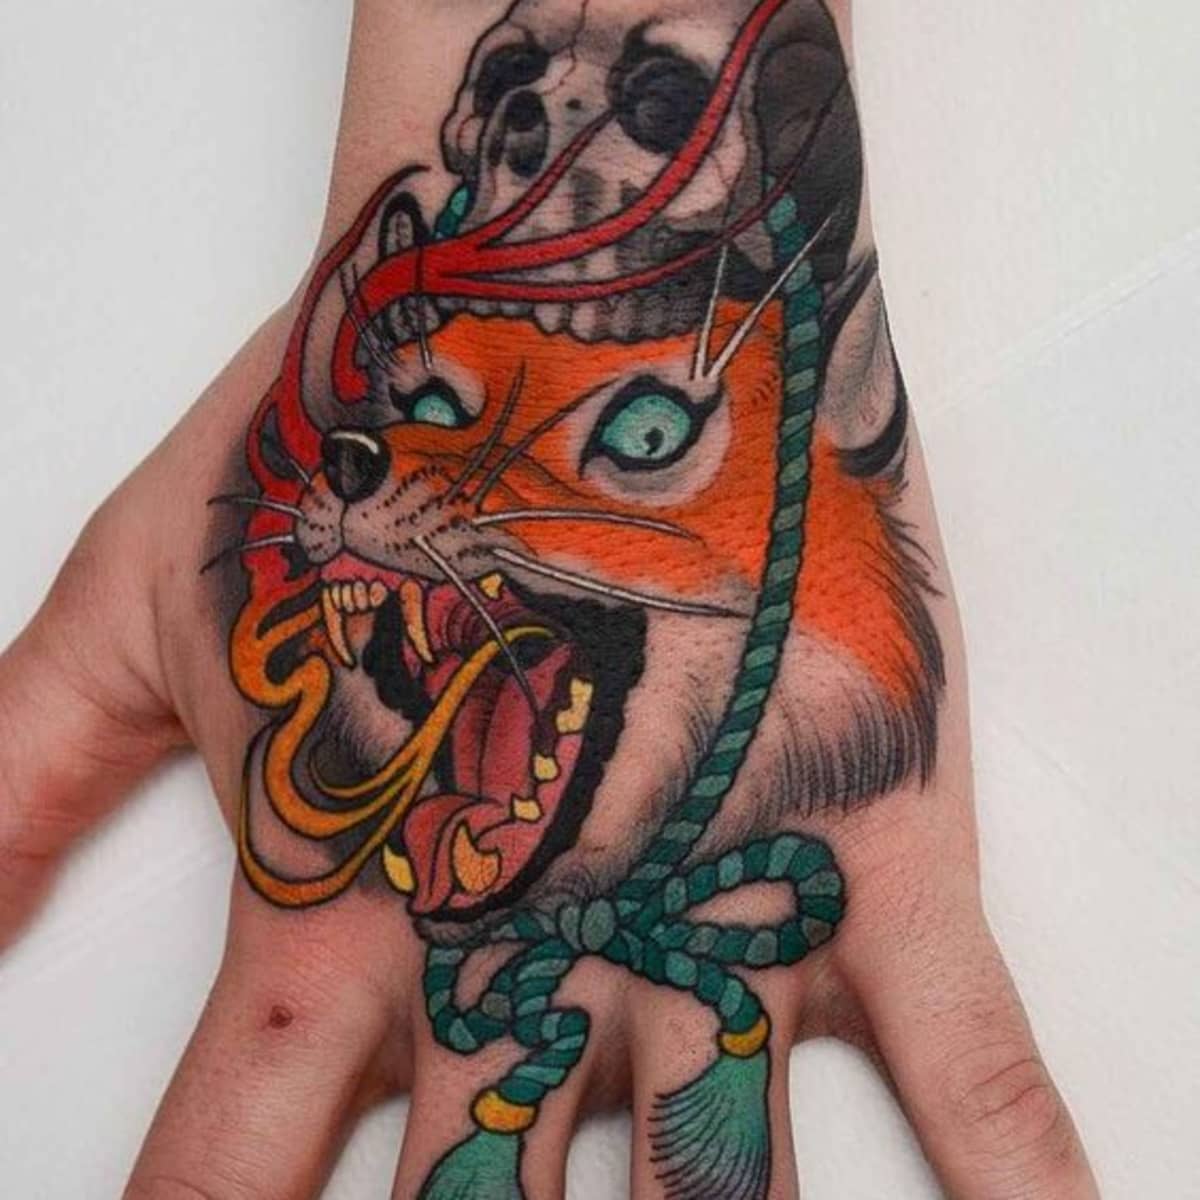 101 Amazing Kitsune Tattoo Designs You Need to See  Tattoo designs Body  art tattoos Tattoo designs men